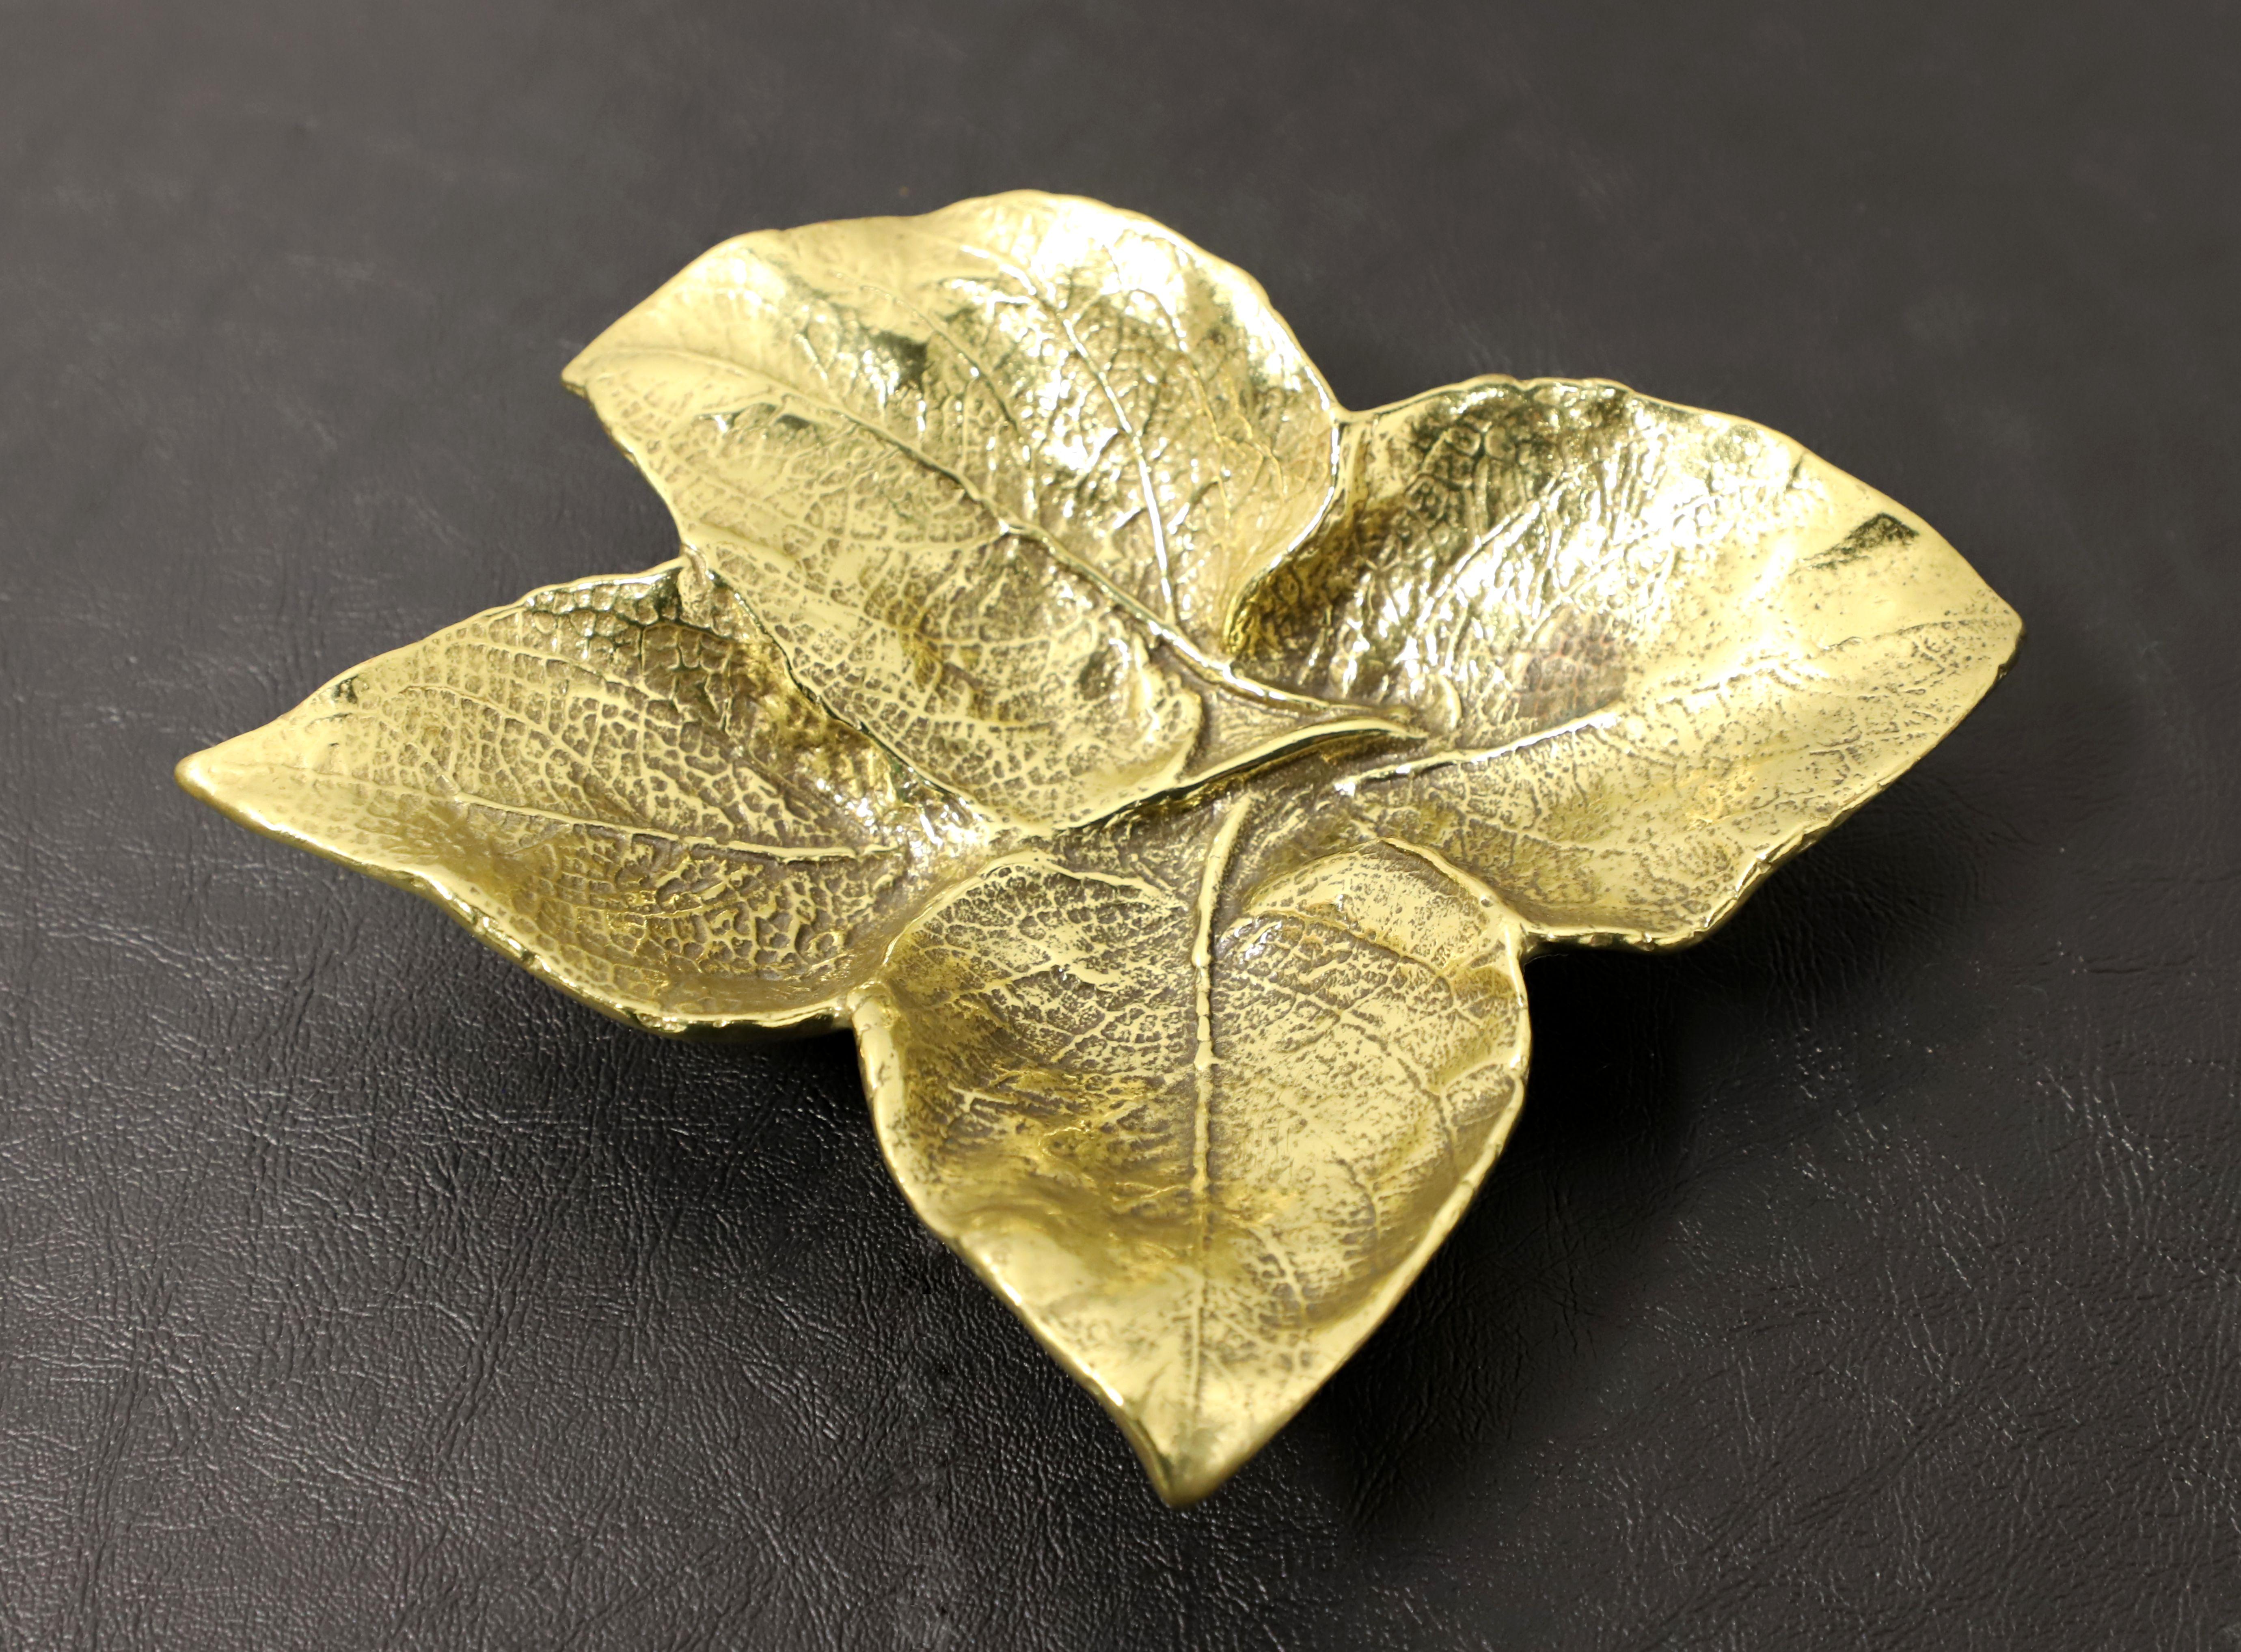 A leaf bowl sculpture by Oskar J Hansen for Virginia Metalcrafters, part of their leaf sculptures collection. Solid brass depicting four leaves of a Coleus plant. Made in Virginia, USA, circa 1963.

Style #:  4-33

Measures: 8.5w 7d 1.5h, Weighs